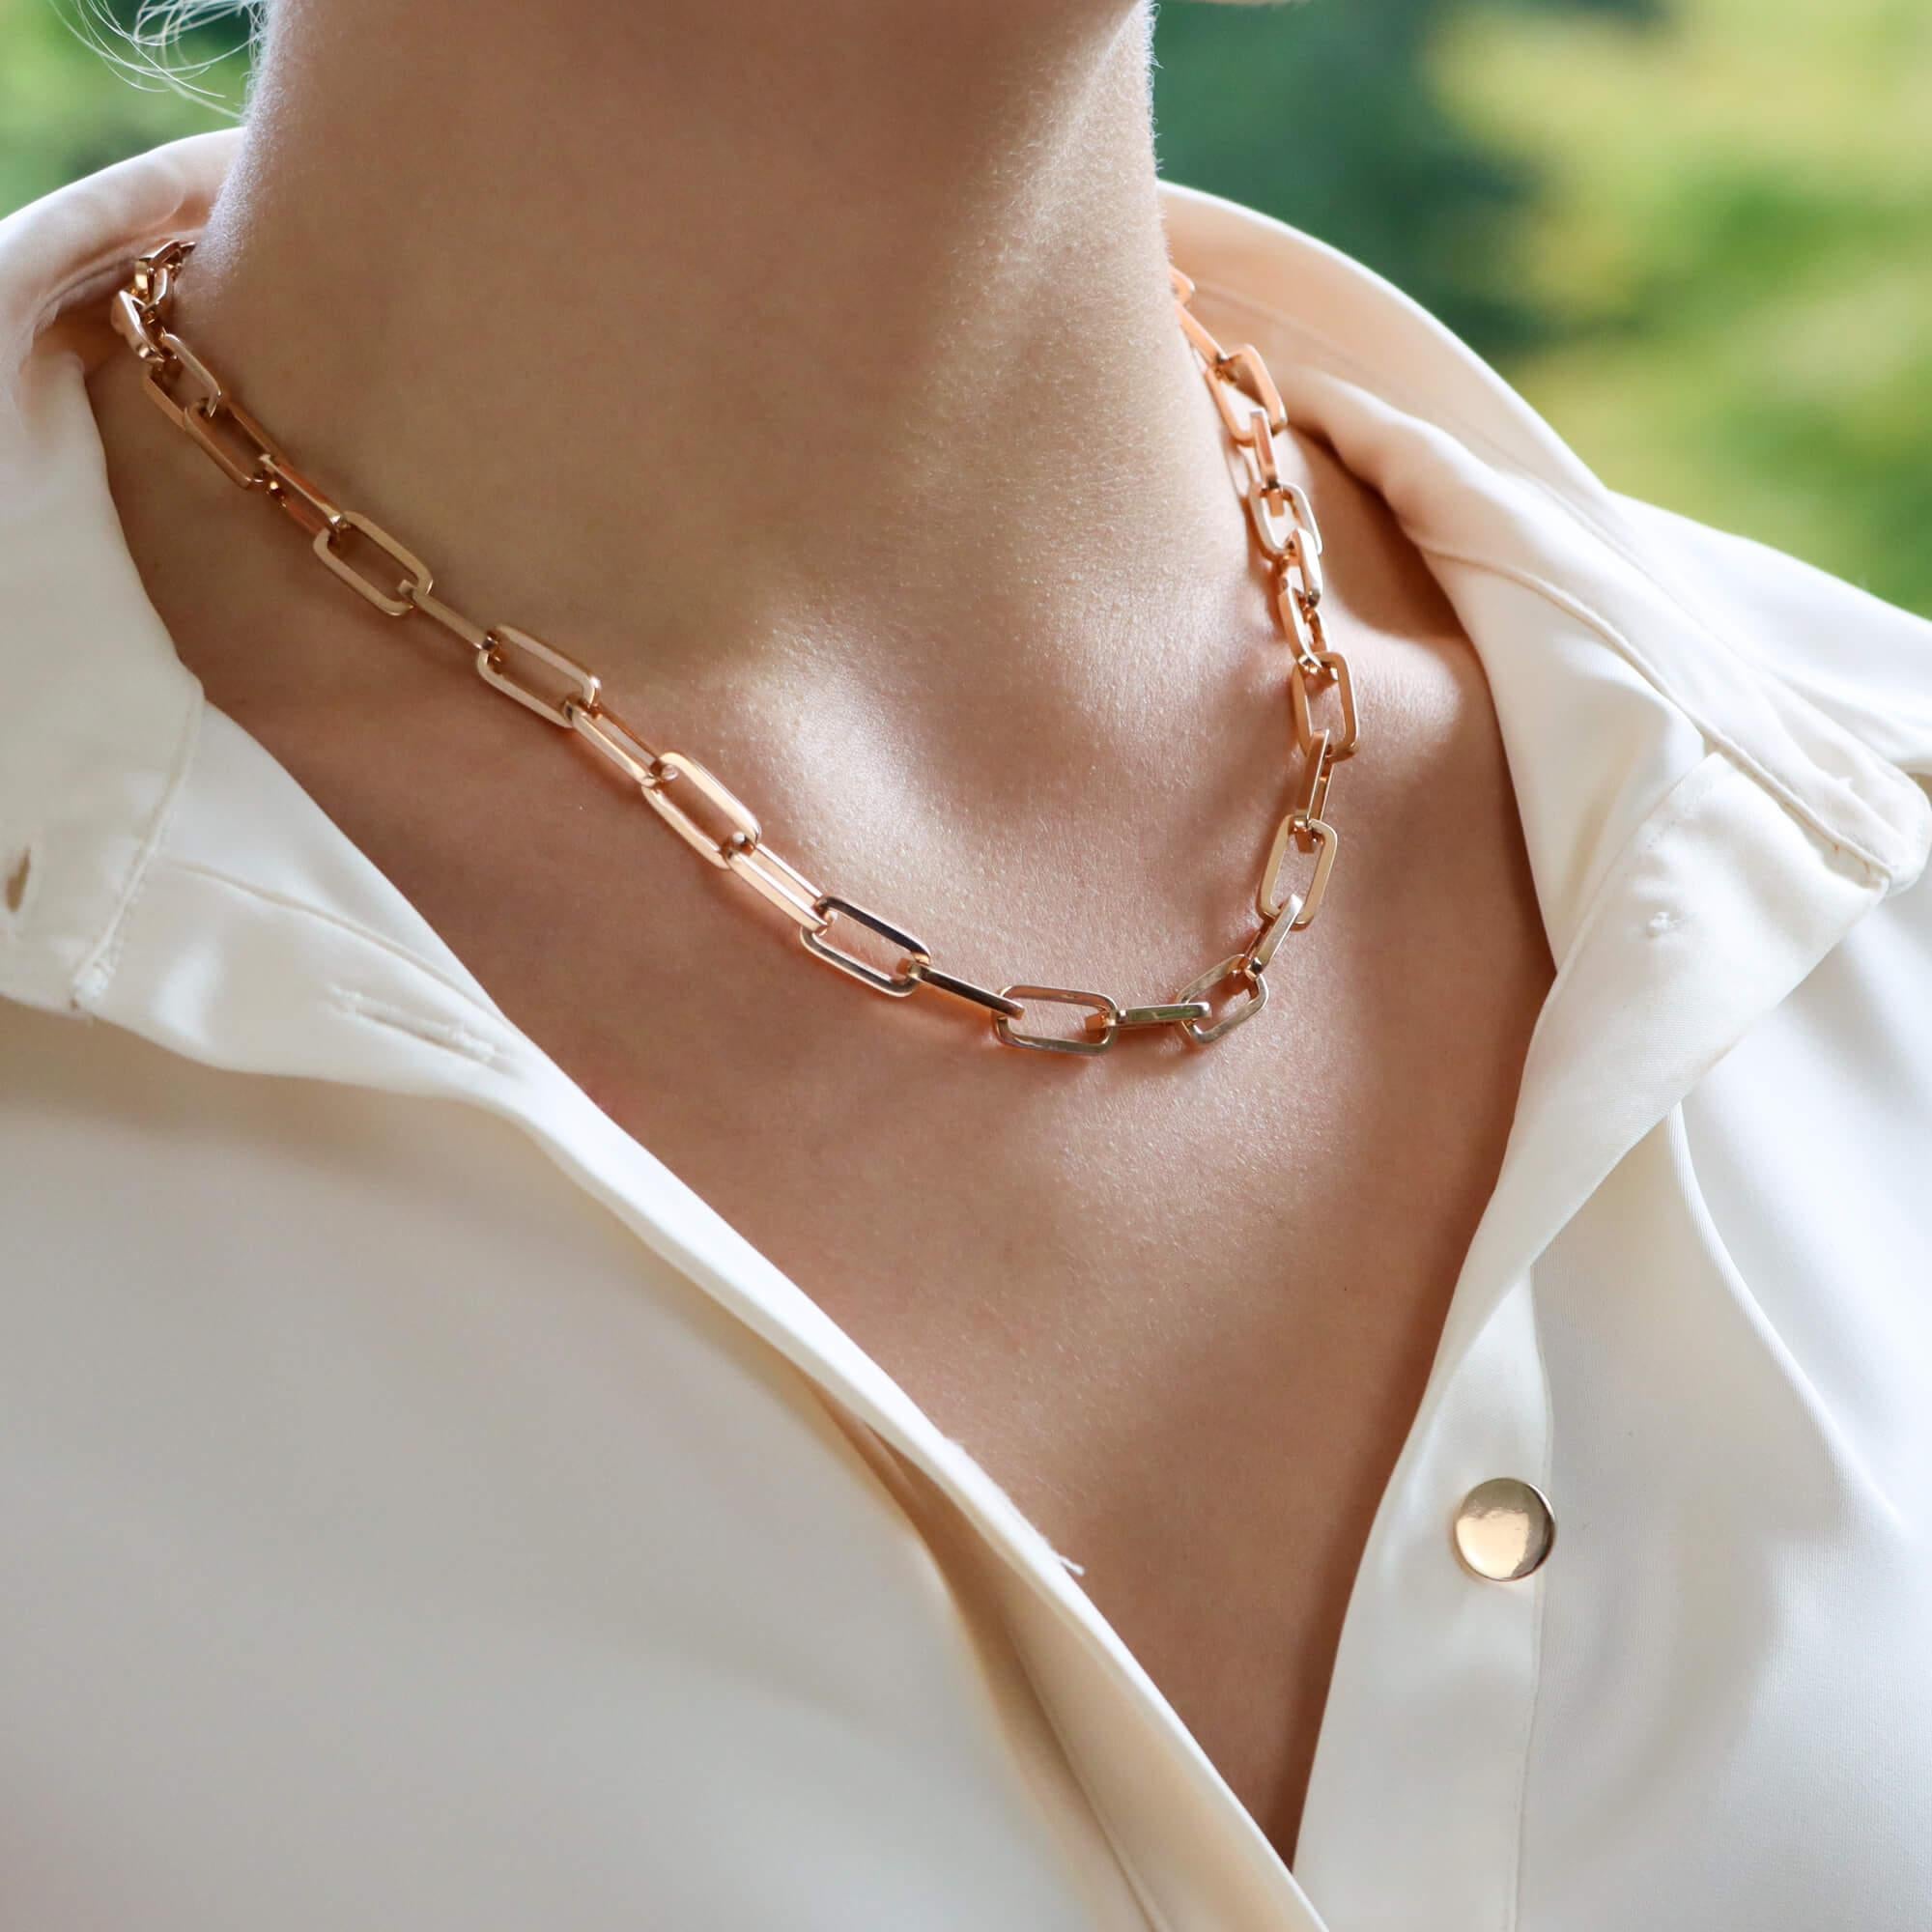 A beautiful contemporary link necklace set in 18k rose gold.

The necklace is composed of exactly 38 elongated oval gold chunky links, connected in an articulated design so that it can sit on the wearers neck comfortably. Once on we see these lovely